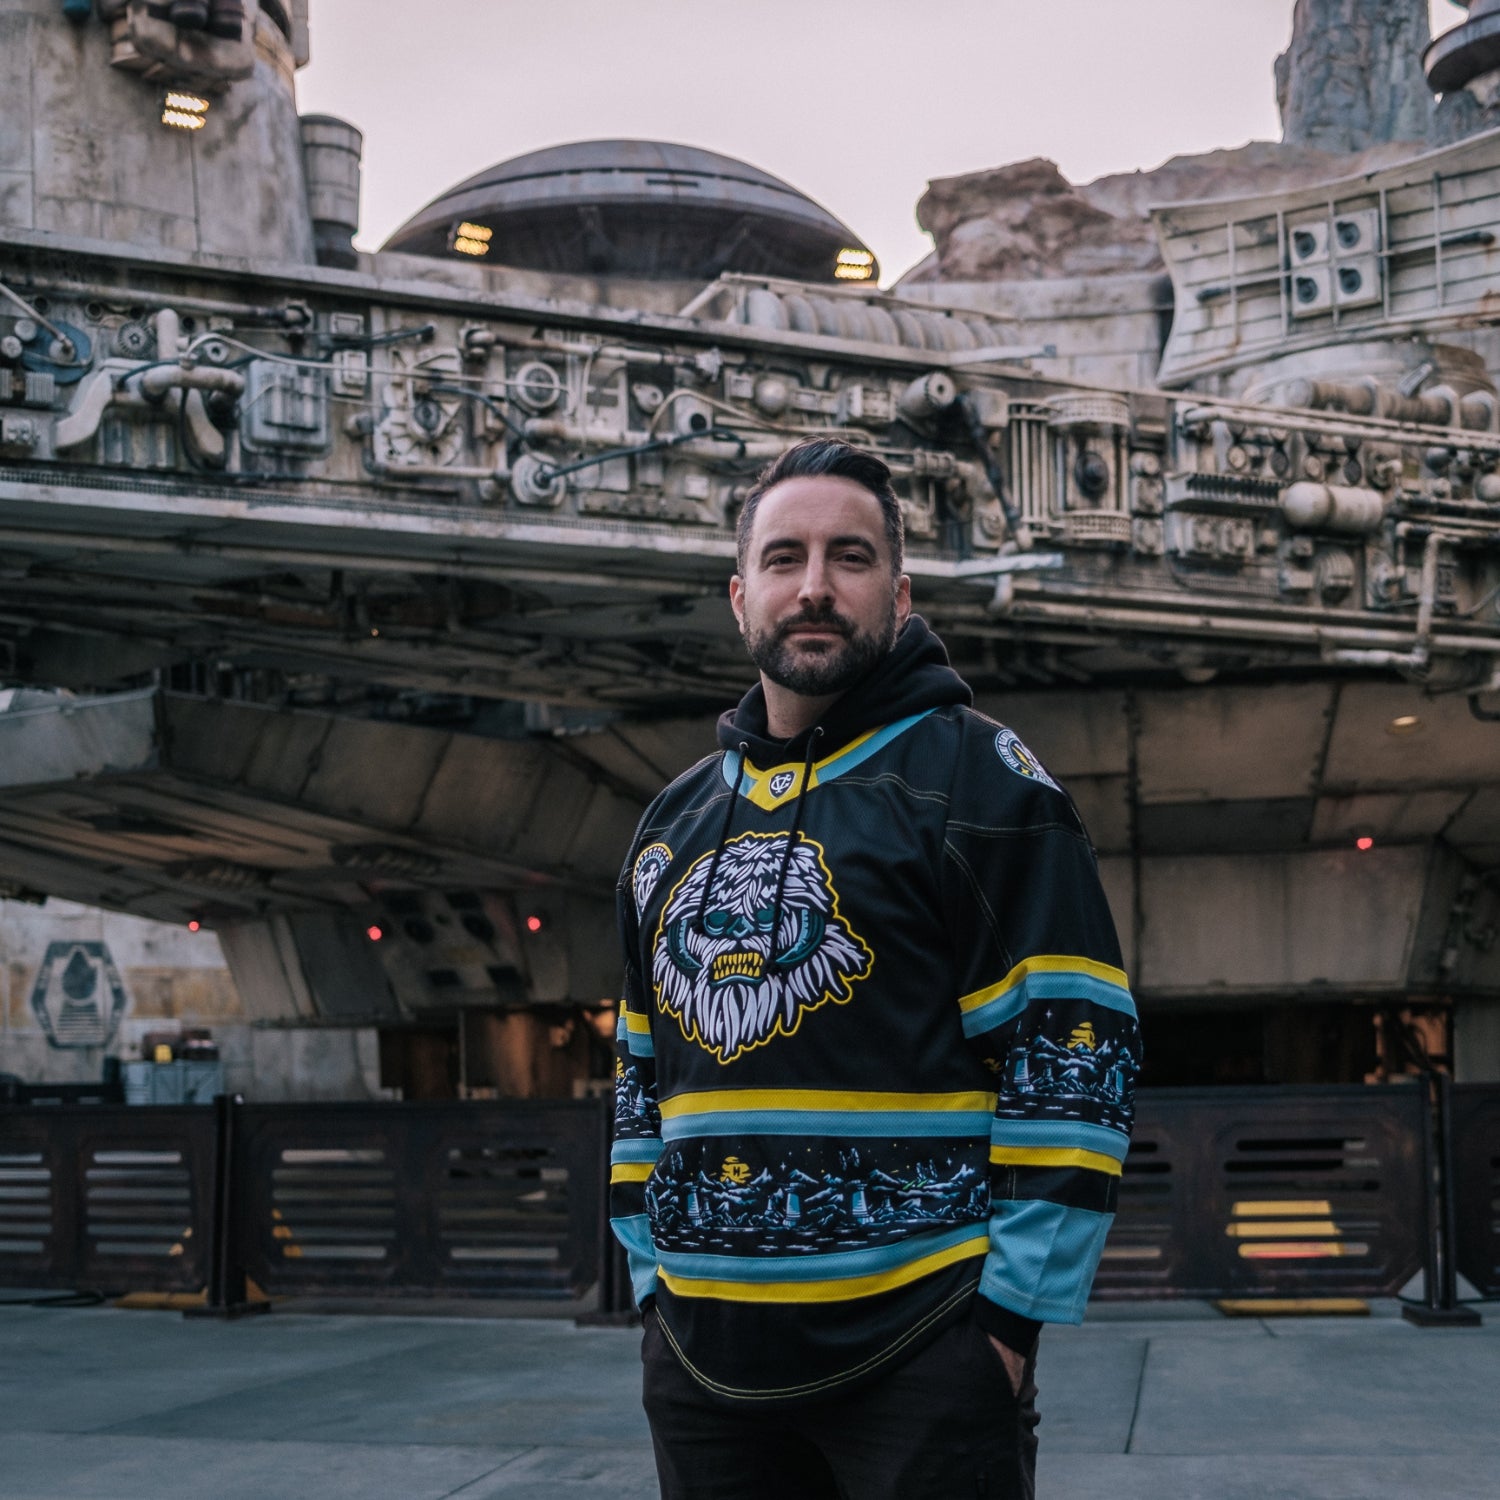 violent gentlemen hockey clothing company hockey club new star wars may the 4th releases - new Hoth hockey jersey, Hoth Star Wars Wampa t-shirt, tee, hoodie, and hockey socks. Learn more by checking out Violent Gentlemen Hockey Apparel